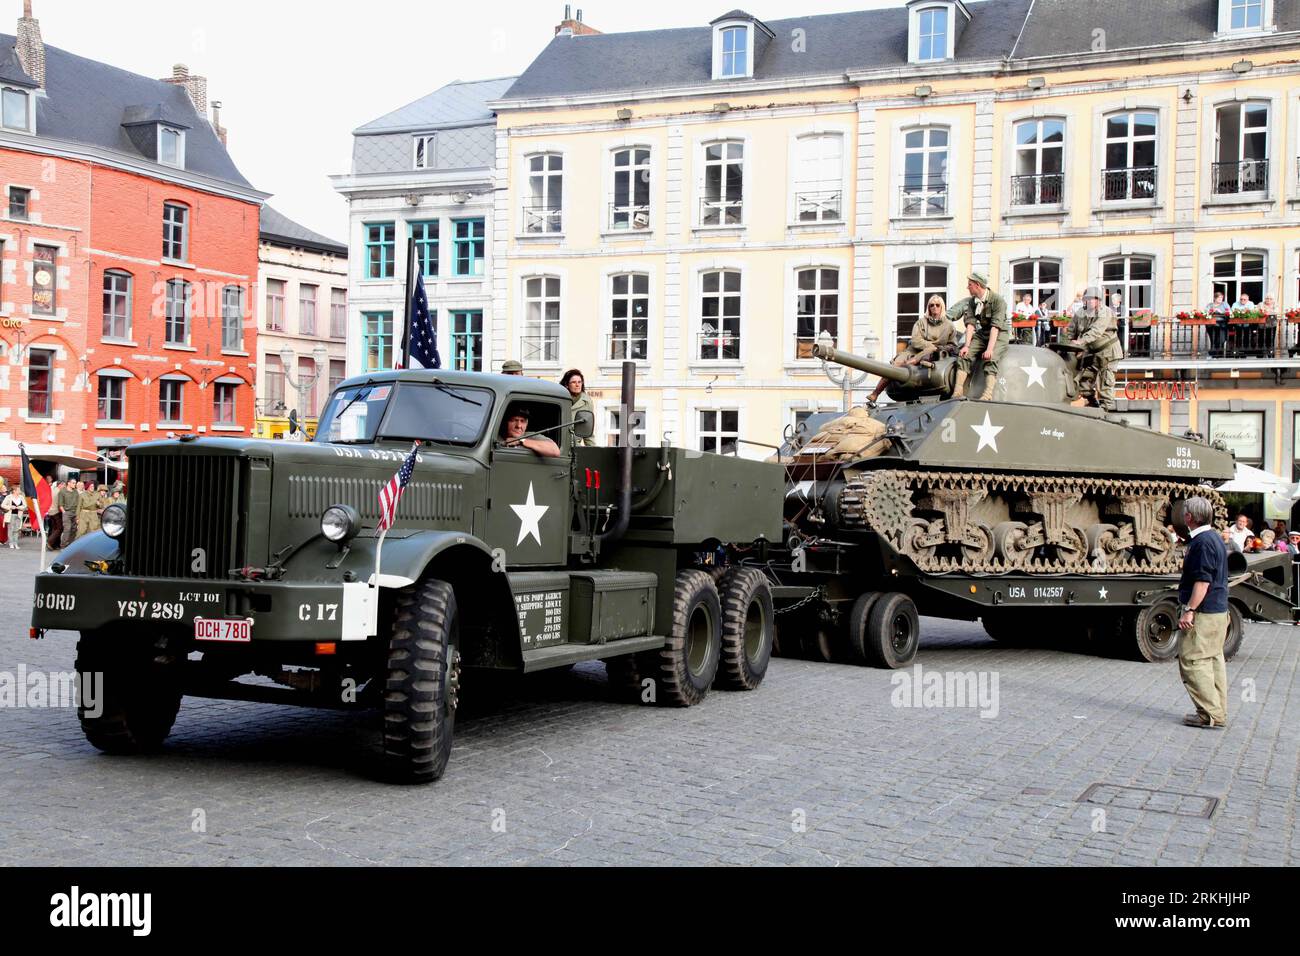 Bildnummer: 55836731  Datum: 28.08.2011  Copyright: imago/Xinhua (110828) -- BRUSSELS, Aug. 28, 2011 (Xinhua) -- A Sherman tanks and a truck arrive at the central plaza of Mons, Belgium, on Aug. 28, 2011. About 100 heavy equipped vehicles collected by military fans from Belgium, France, Germany, the Netherlands and Switzerland arrived in Mons on Sunday, to reproduce the appearance of liberation of Mons in World War II in 1944. More than 2,000 attended the activity. (Xinhua/Wang Xiaojun) BELGIUM-MONS-MILITARY FANS-ACTIVITY PUBLICATIONxNOTxINxCHN Gesellschaft Politik Jahrestag Befreiung Gedenken Stock Photo